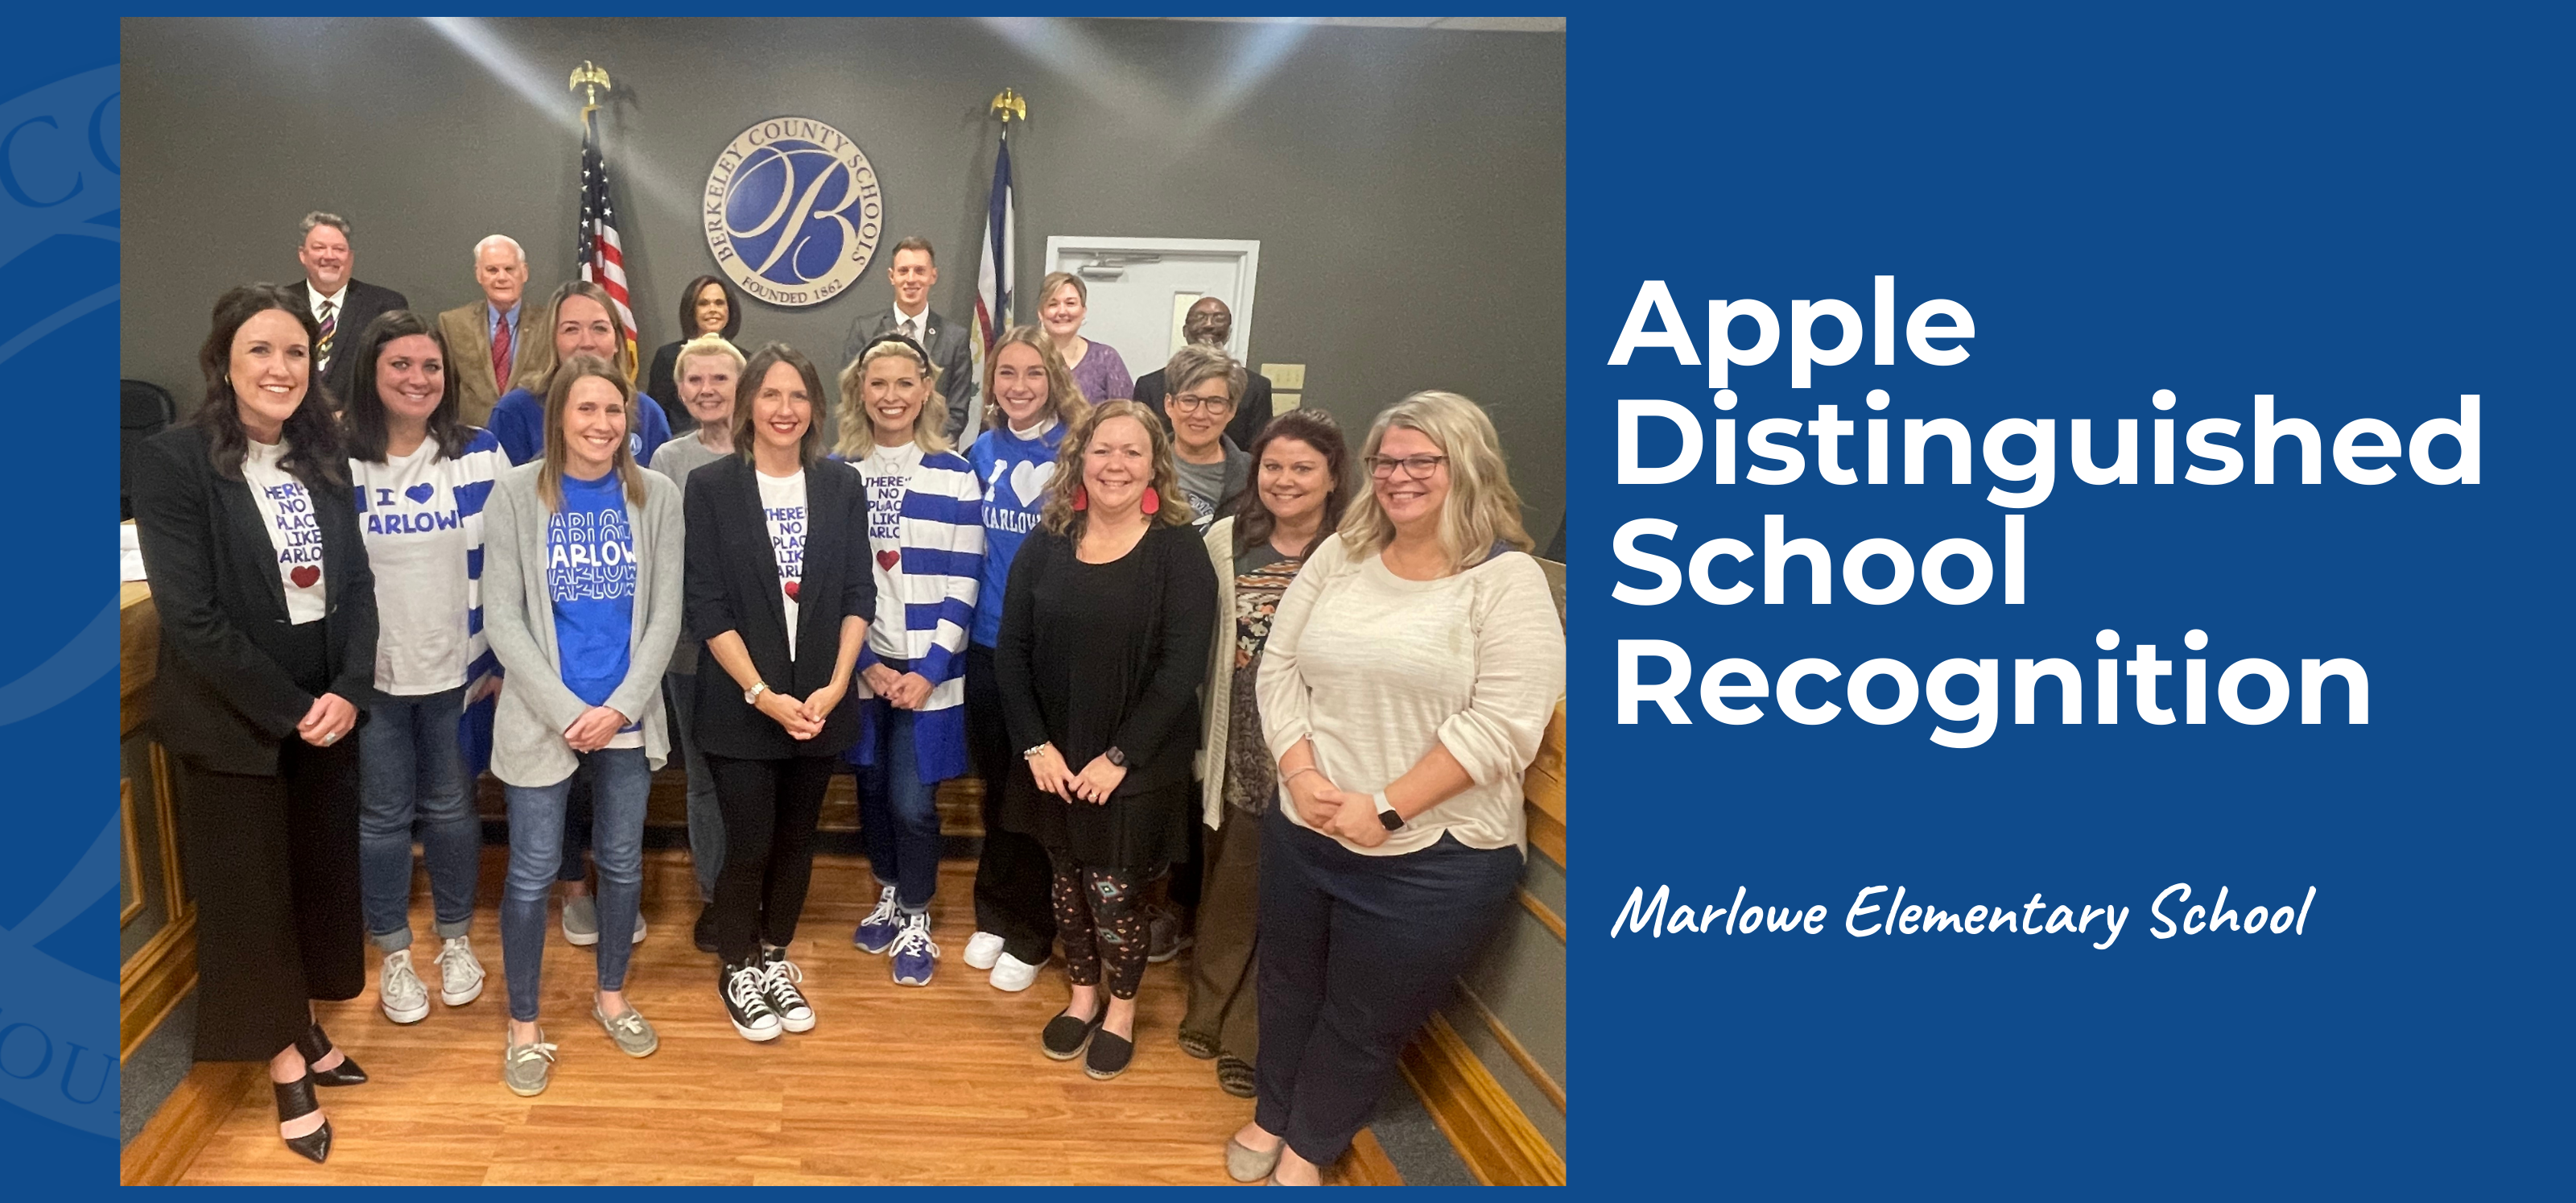 image of marlowe elementary staff recognized for becoming an apple distinguished school